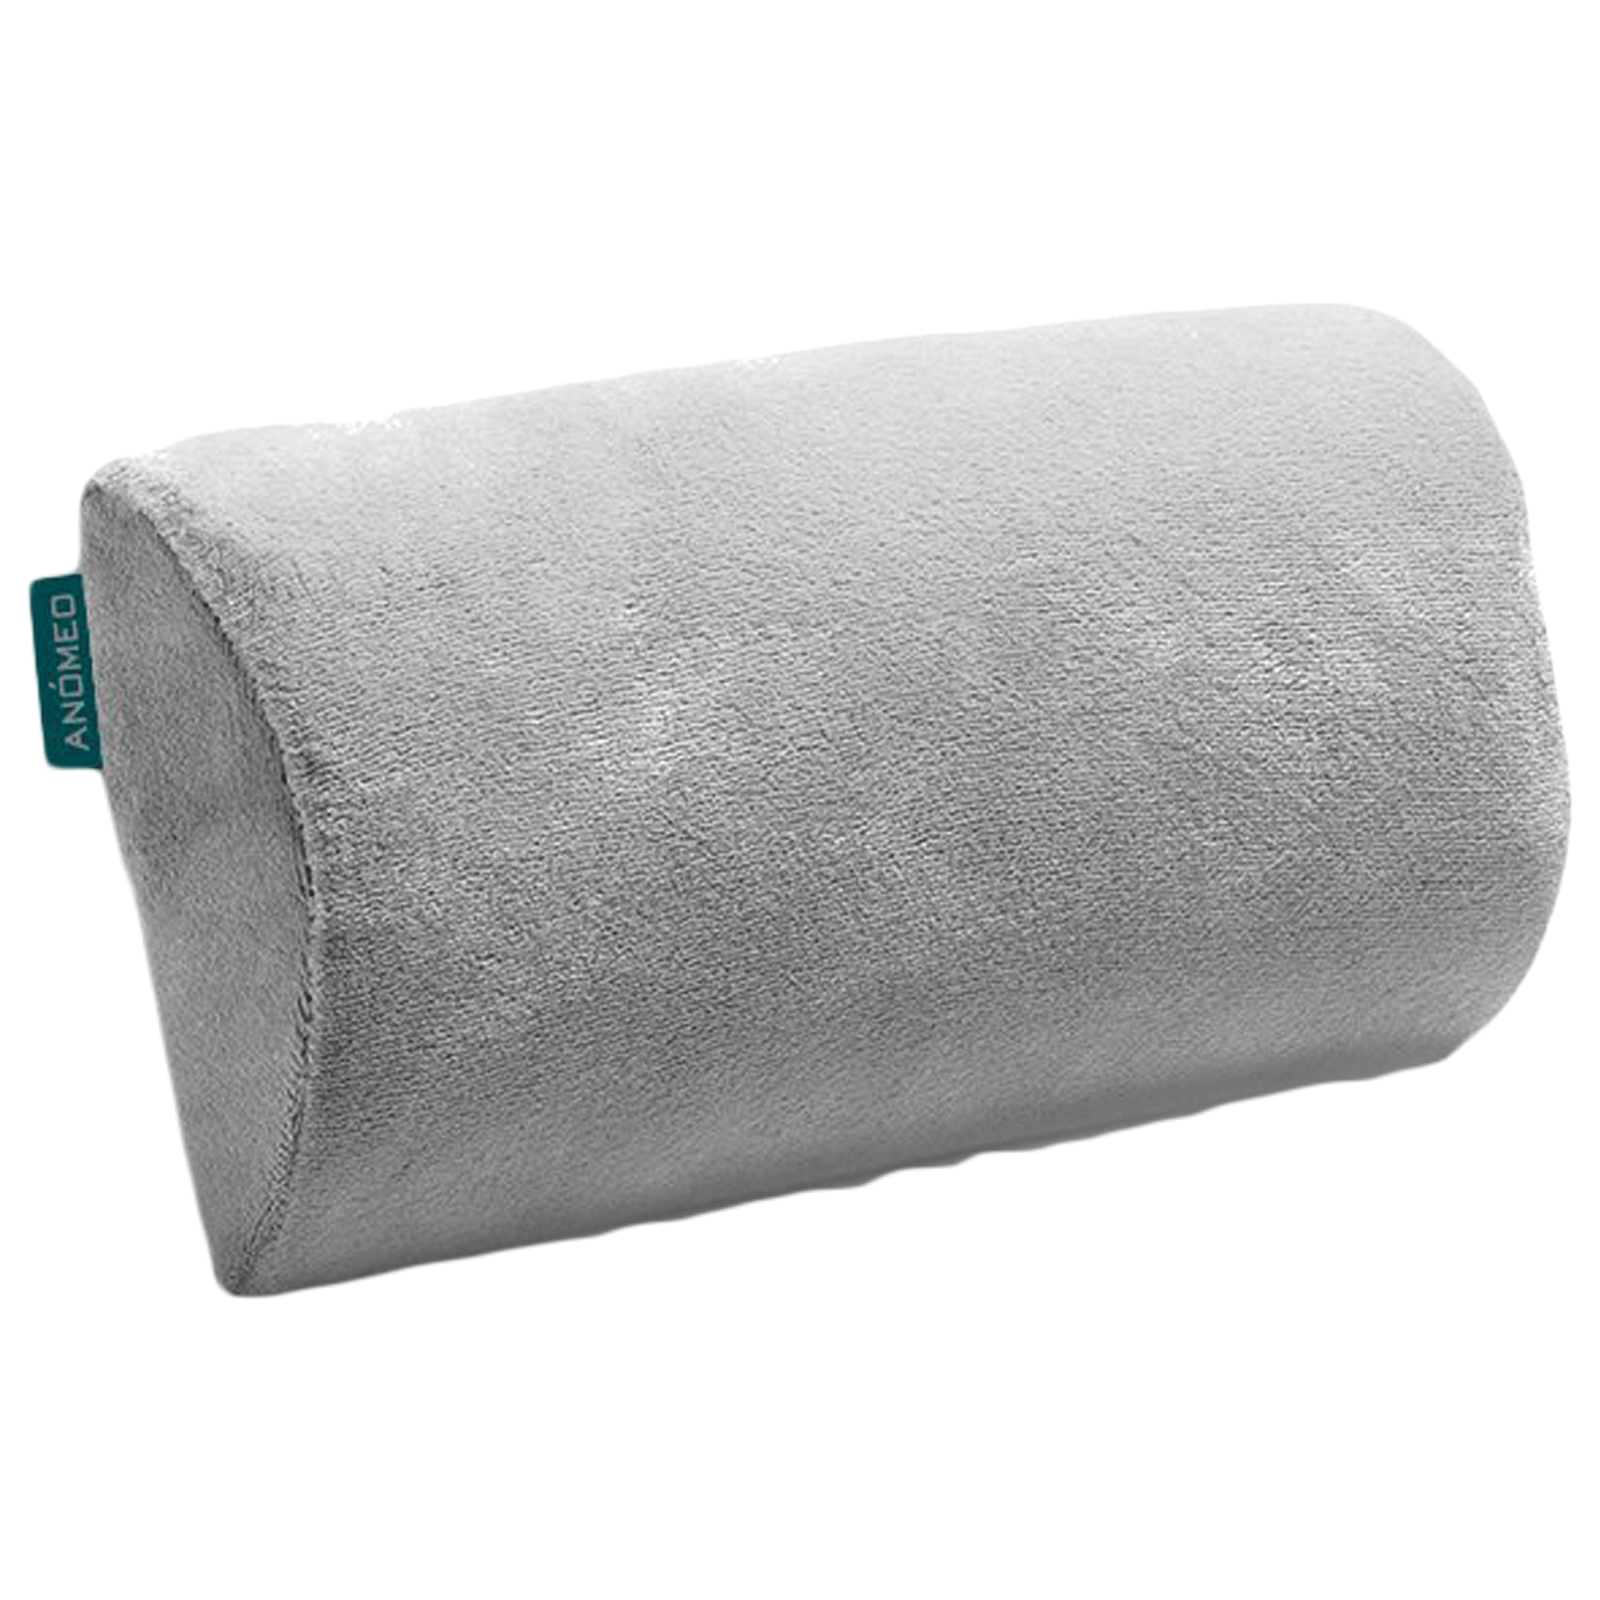 ANOMEO Half Cylinder Memory Foam Neck Pillow (Hypoallergenic and Relieves Neck Pain, 2407, Grey)_1